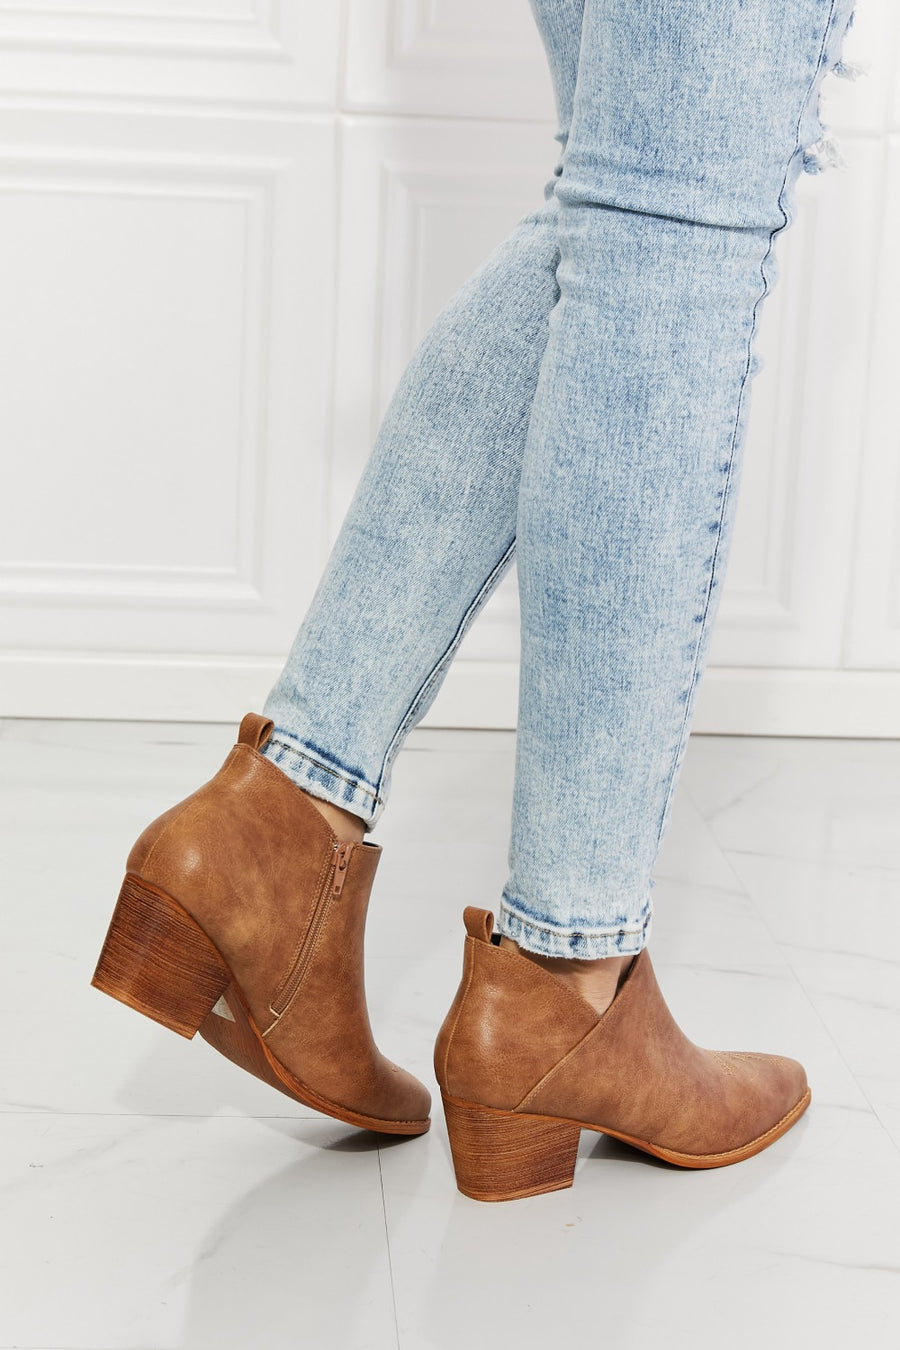 MMShoes Trust Yourself Embroidered Crossover Cowboy Bootie in Caramel